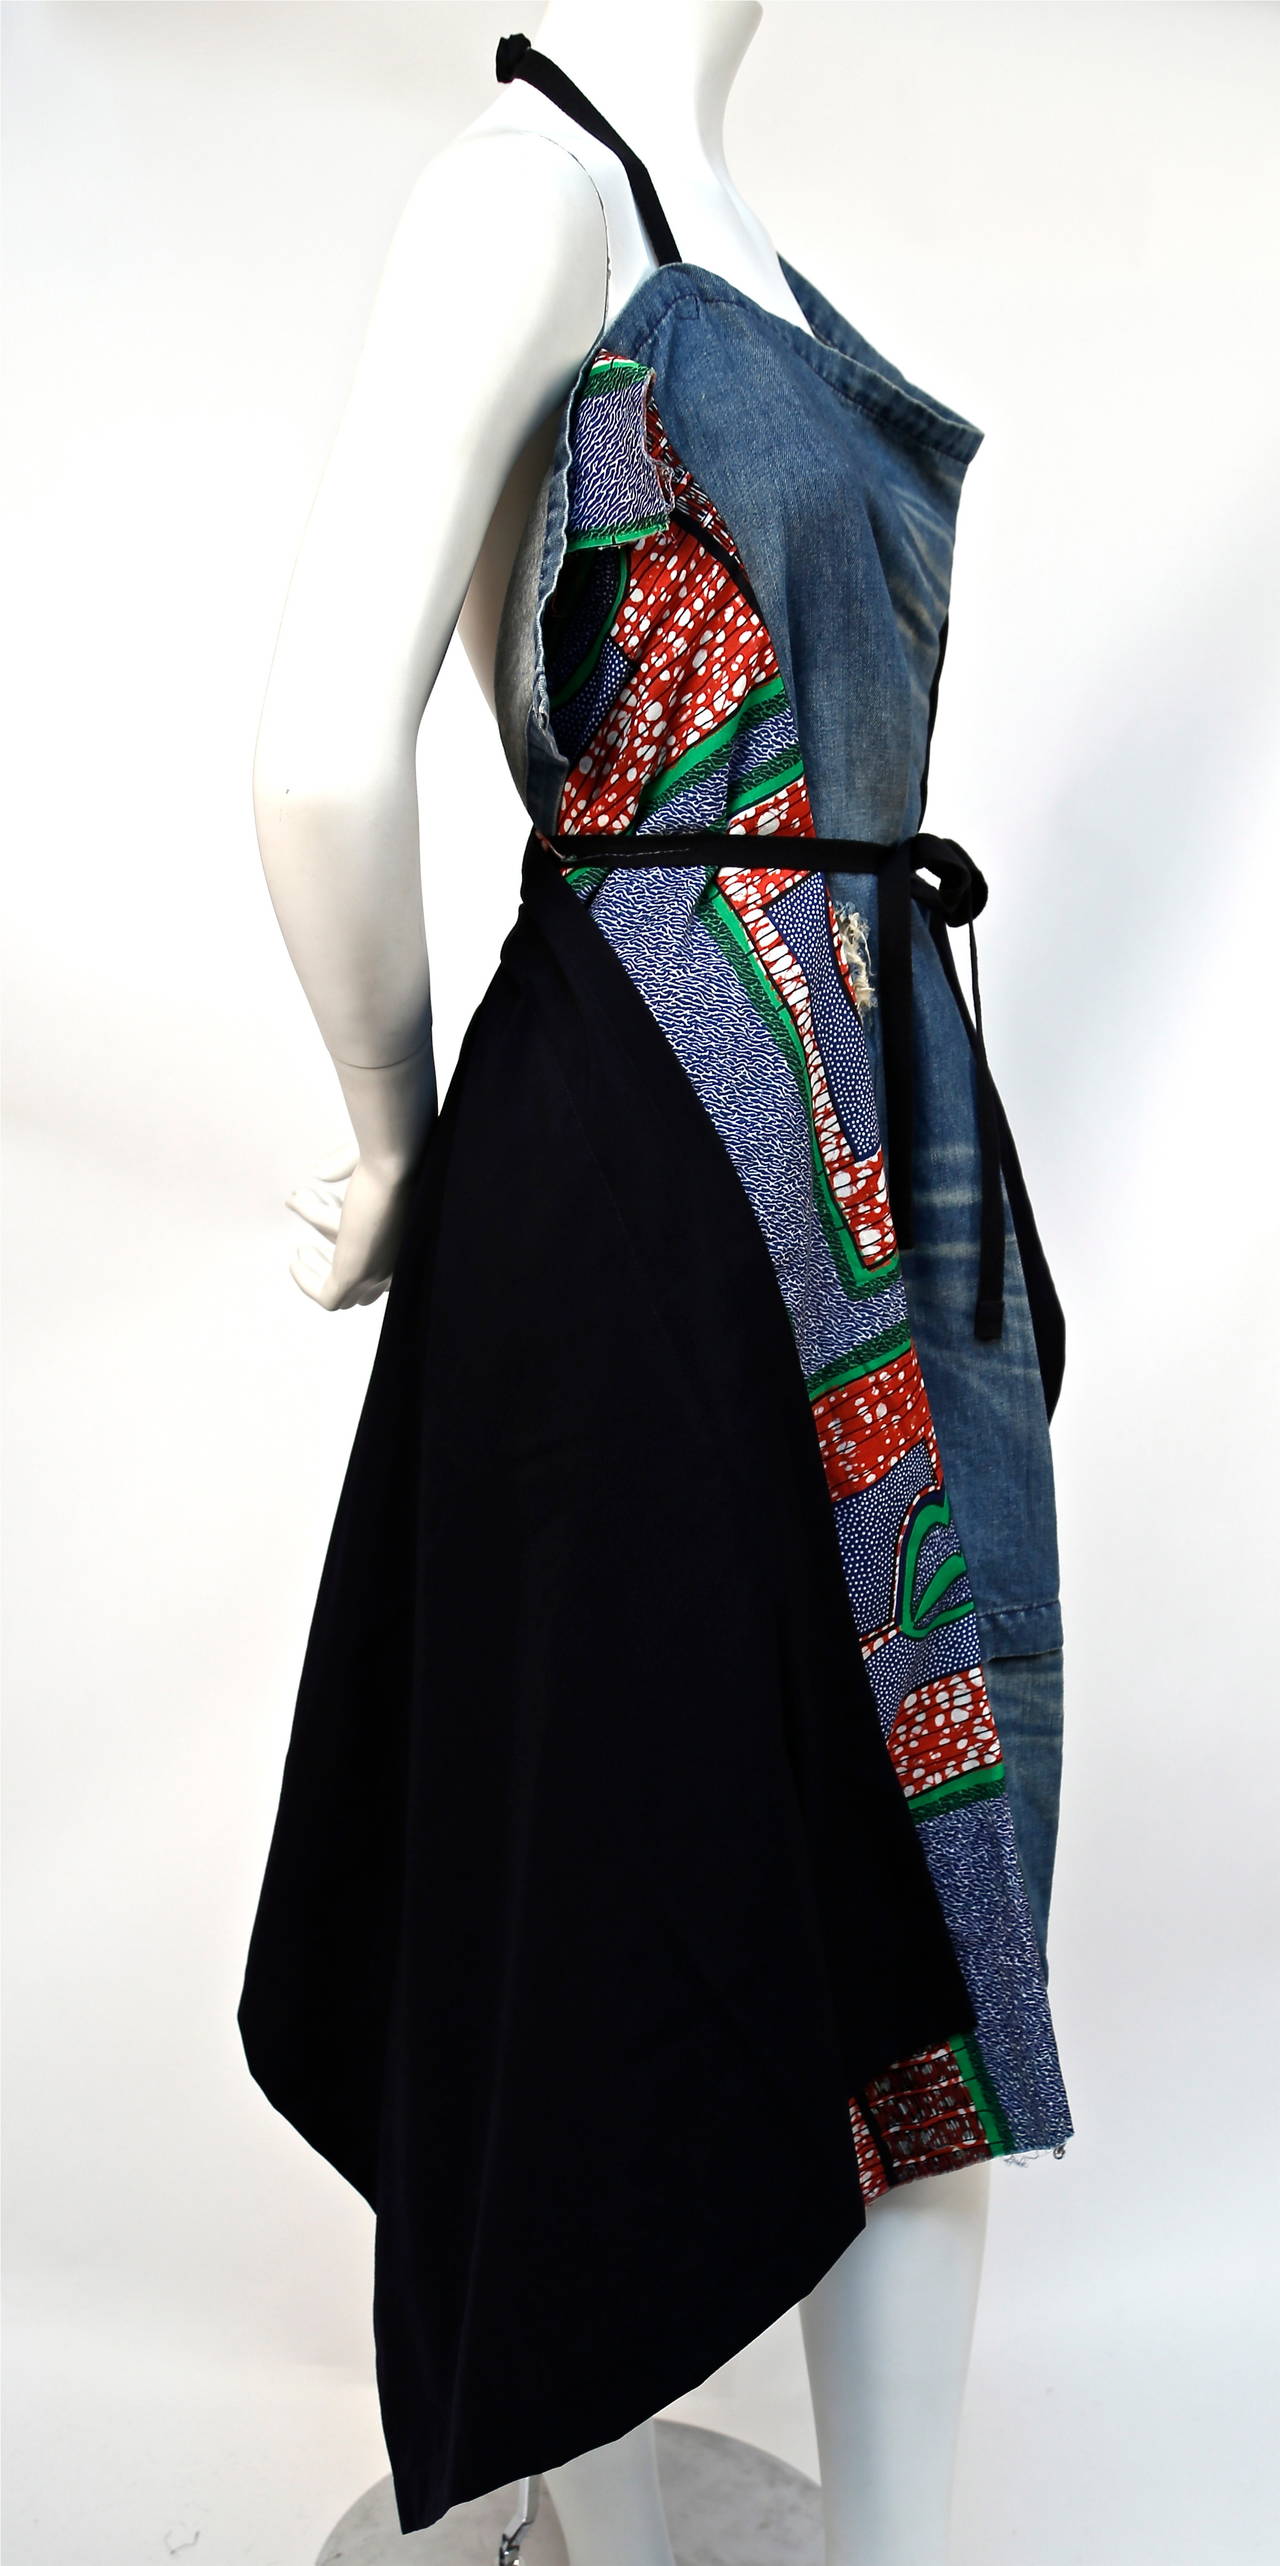 African printed cotton and distressed denim wrap apron dress from Junya Watanabe as seen on the runway for spring of 2009. Size 'S'. Made in Japan. Secures at waist with black tie.  Dress has intentionally frayed areas and raw hemline. Excellent